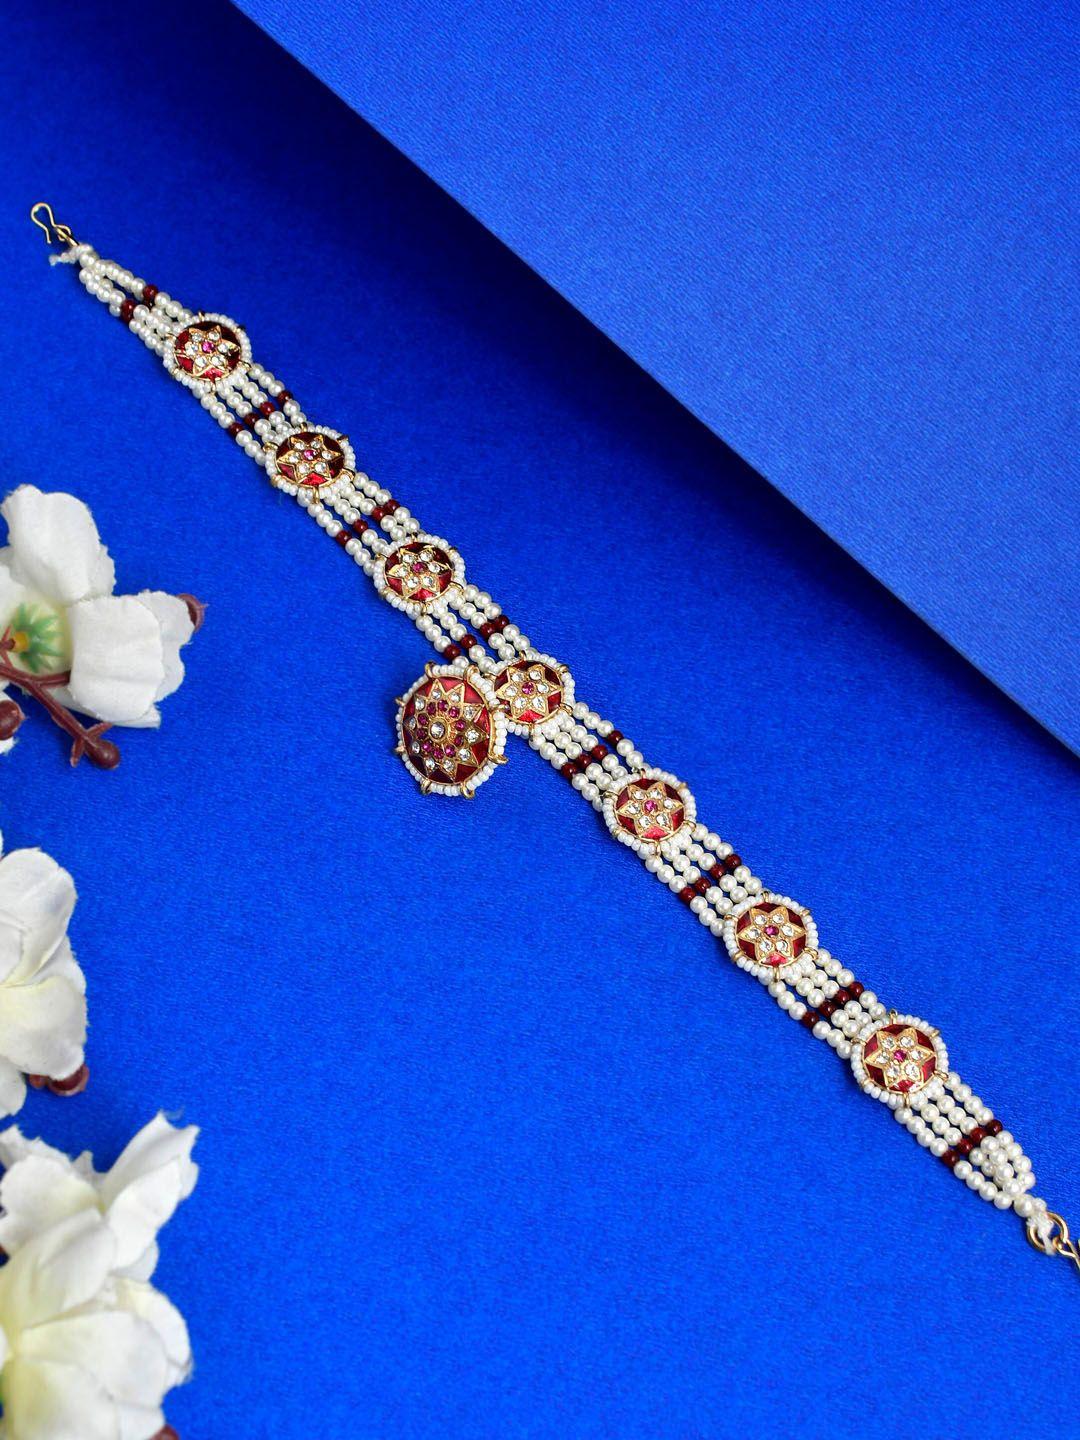 silvermerc designs gold-plated stone-studded & pearl beaded sheeshphool